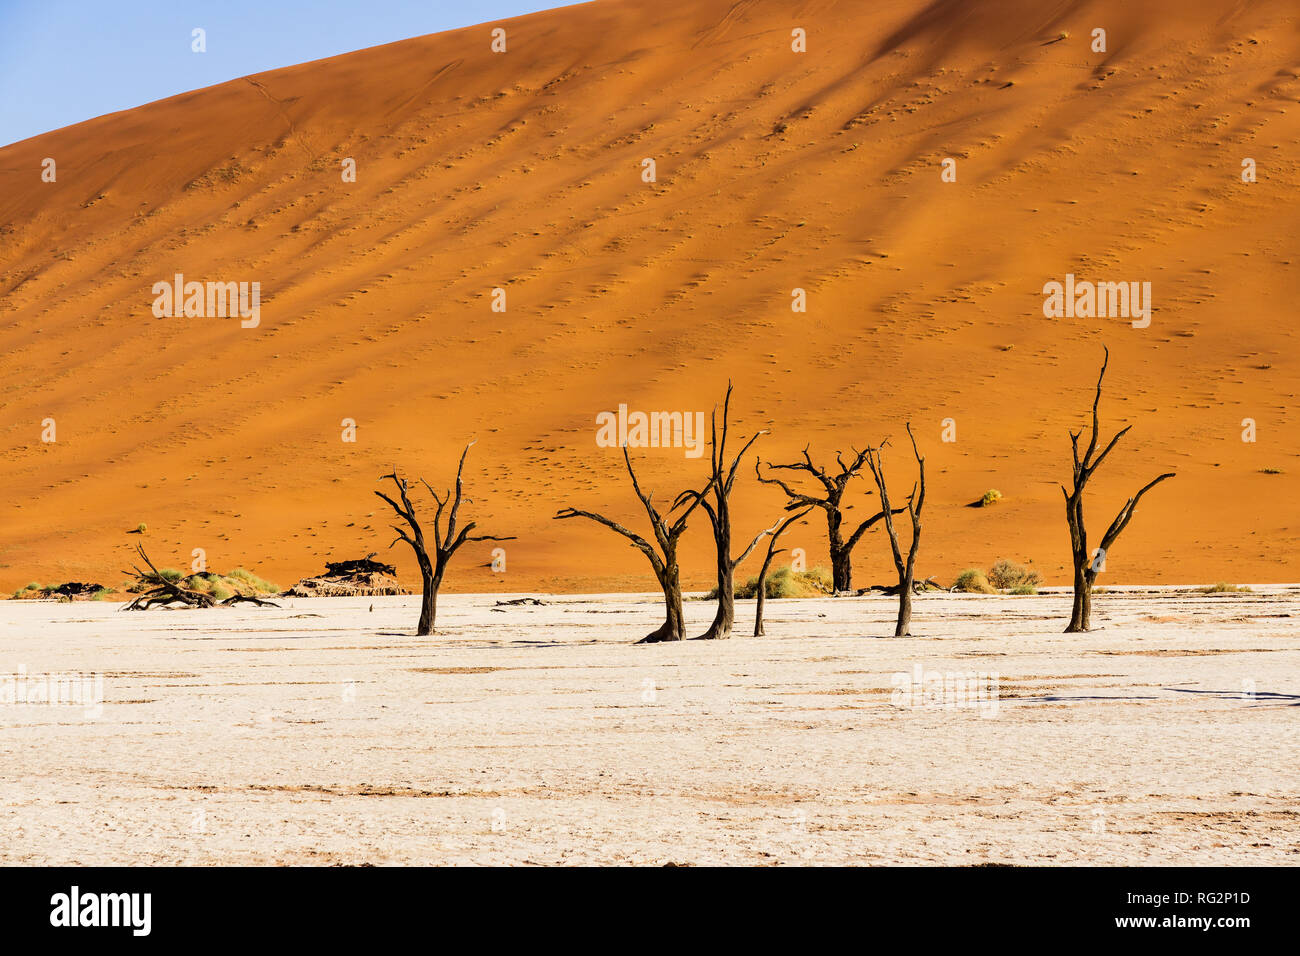 Dead Vlei, Namibia Dead Vlei , dead trees in desert,hot sun beating down on the sandy ground,red dunes in the backround,millions of tourists visit eve Stock Photo